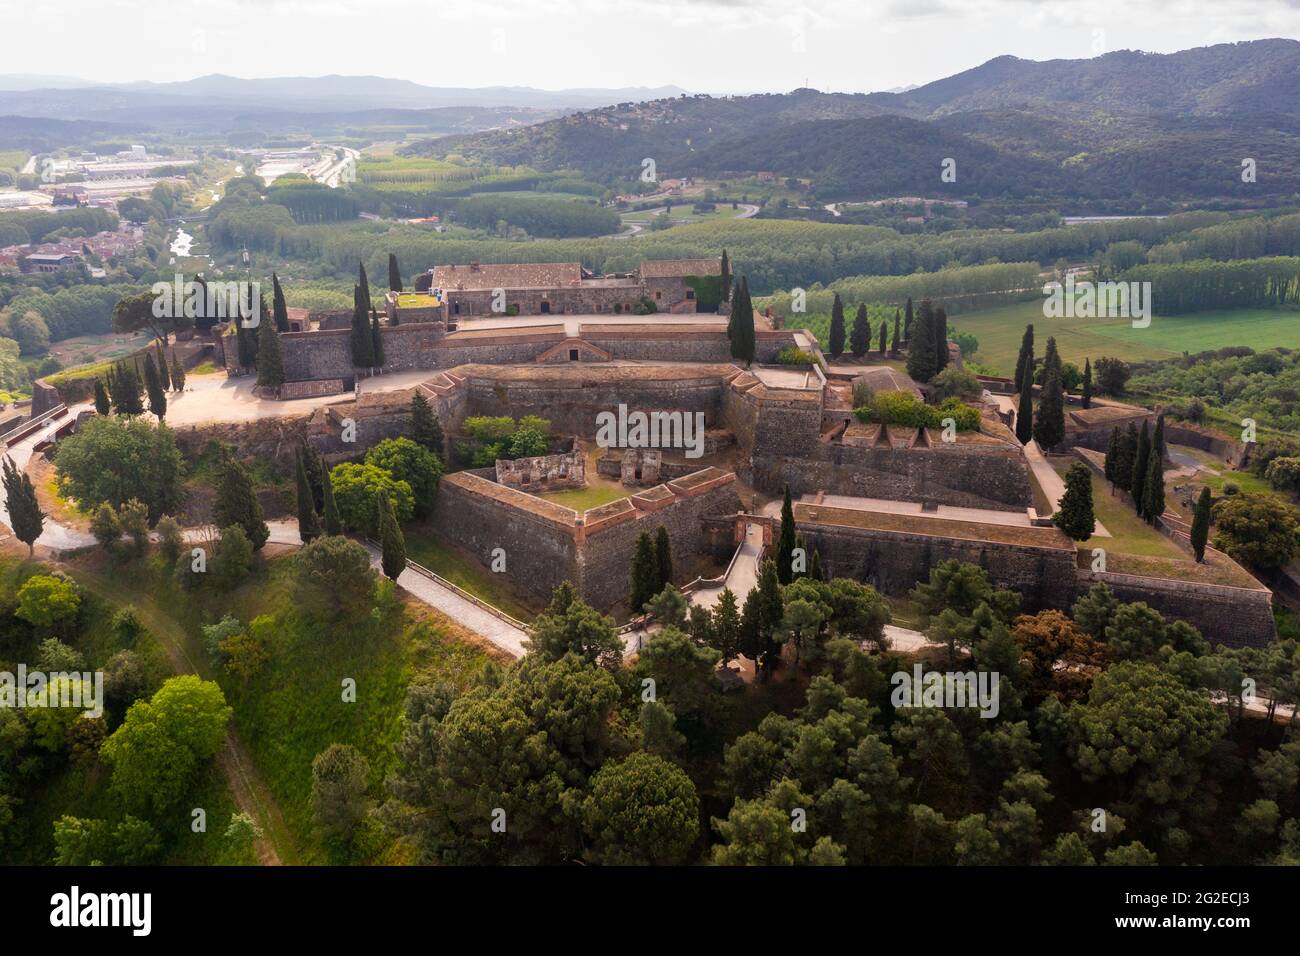 Aerial view of medieval fortress on hill in Hostalric village, Spain Stock Photo